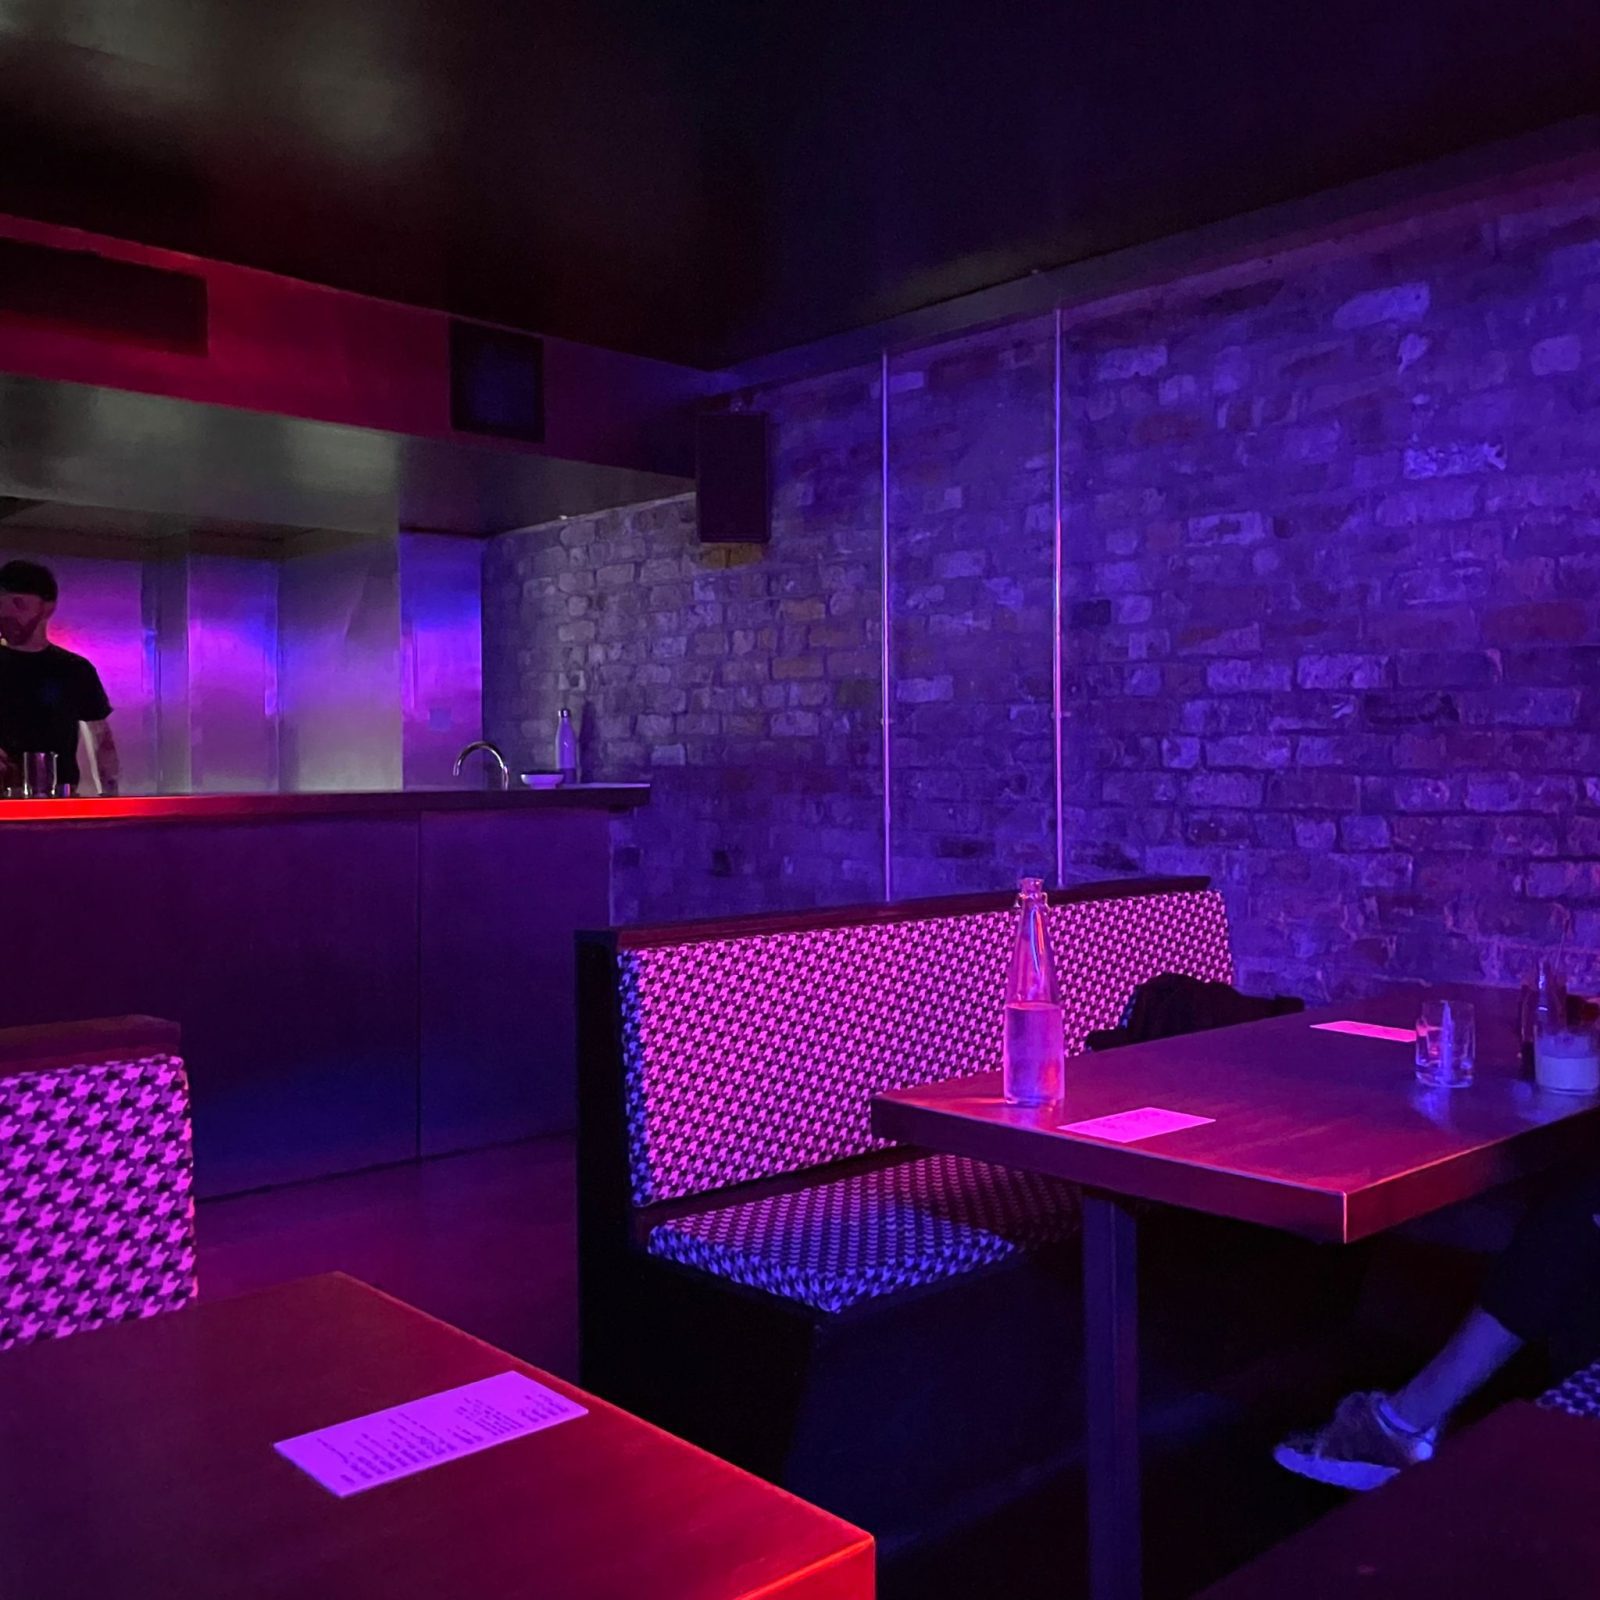 A futuristic new Blade Runner-style bar has opened beneath NQ restaurant District, The Manc